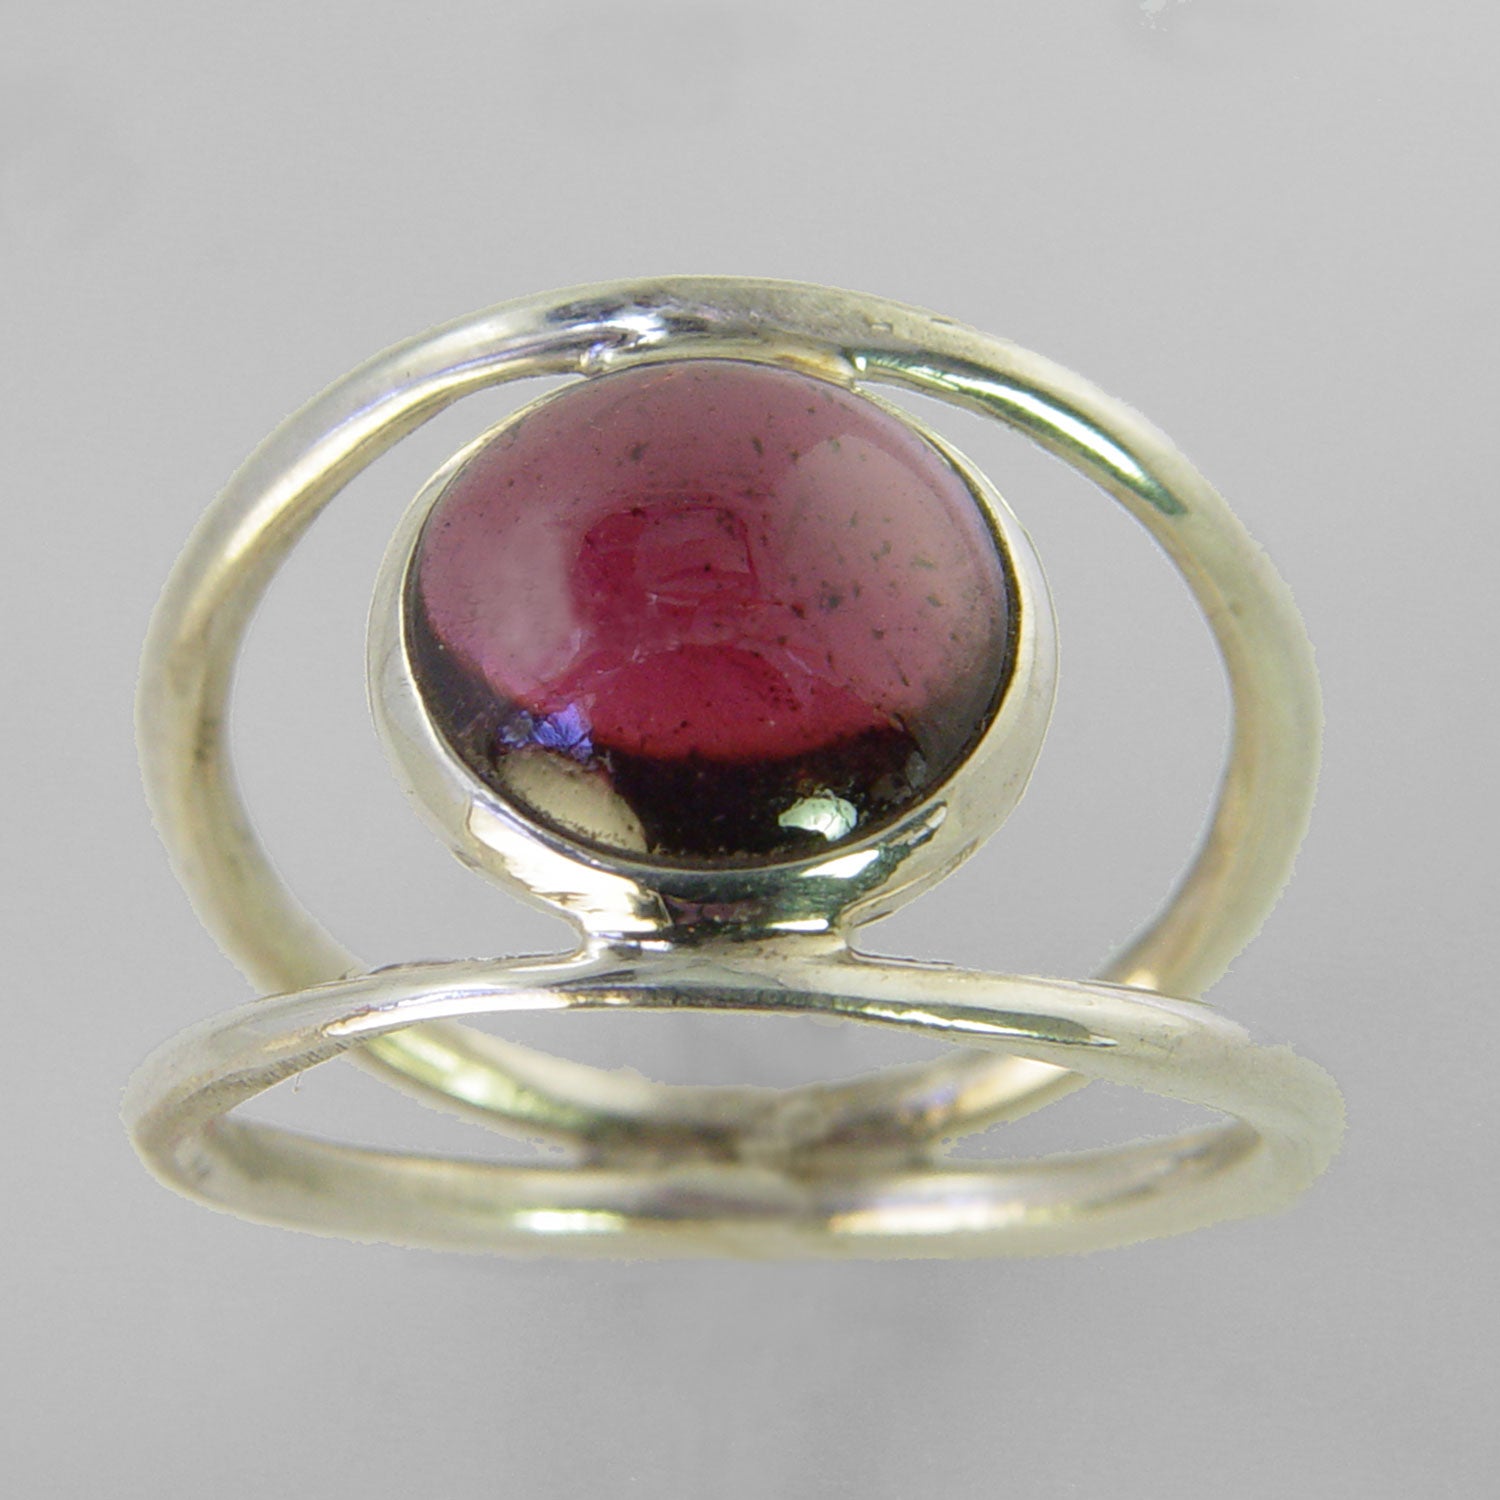 Garnet 3 ct Round Cab Sterling Silver Ring, Size 8